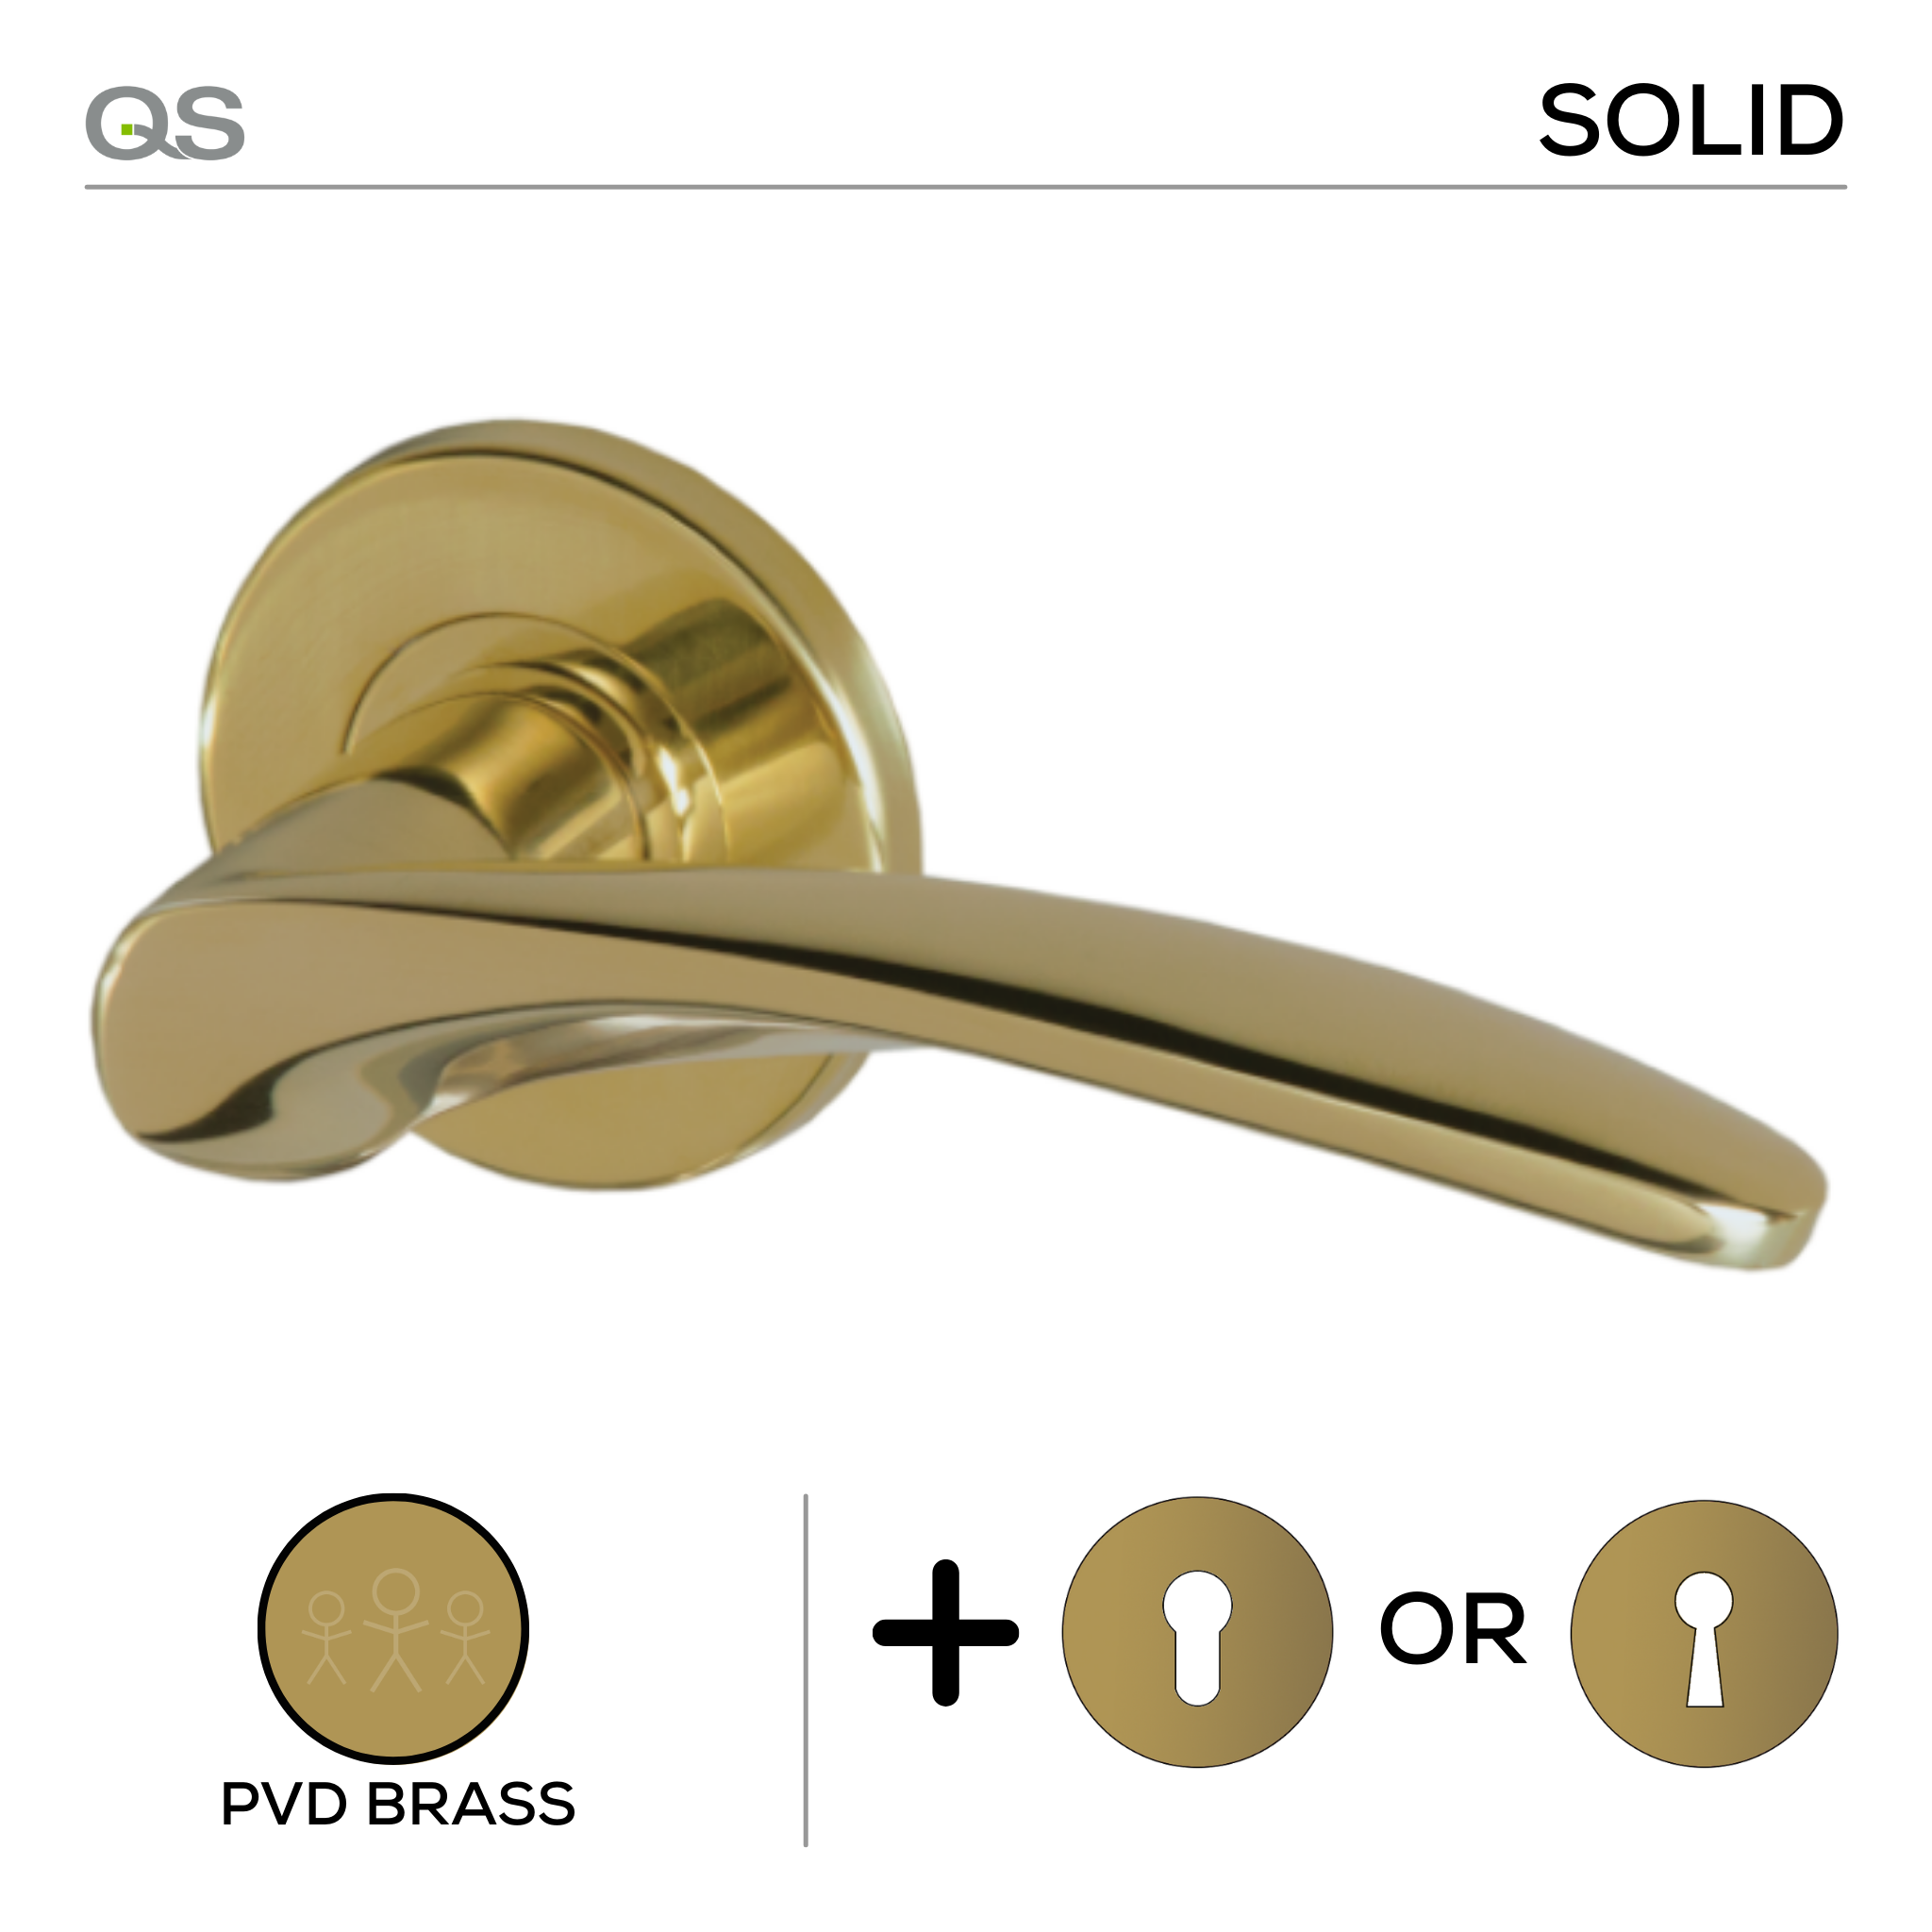 Molo PVD, Lever Handles, Solid, On Round Rose, With Escutcheons, PVD Brass, QS